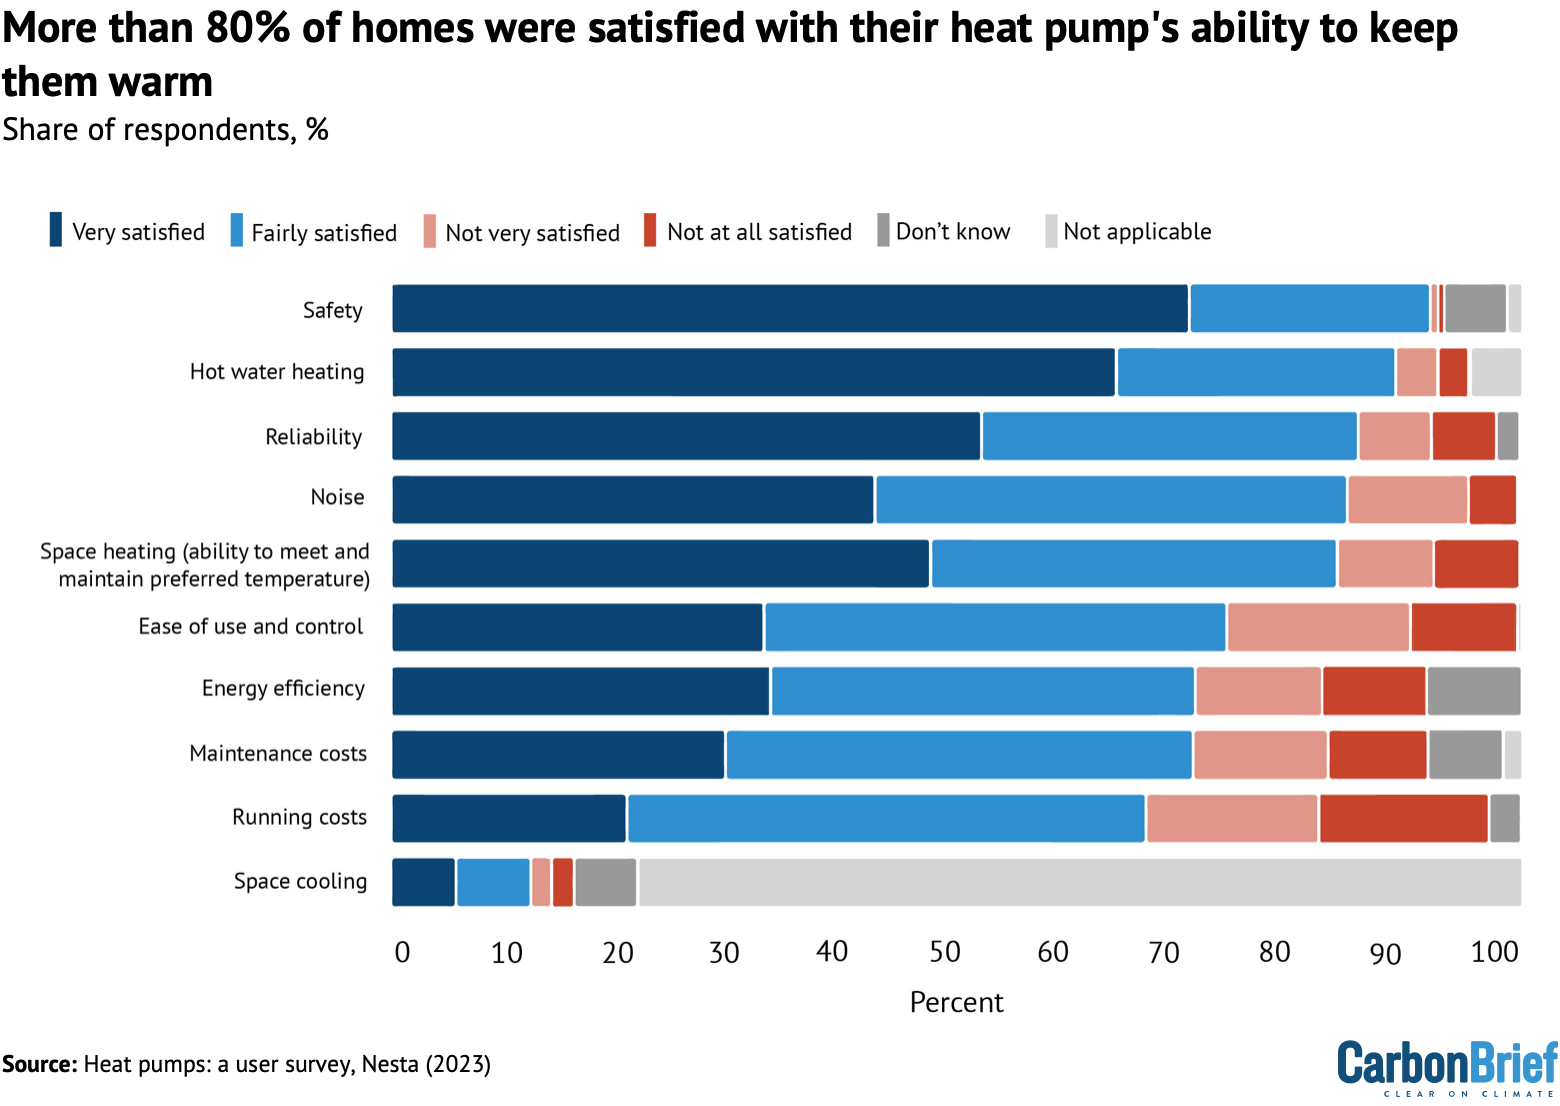 More than 80% of homes were satisfied with their heat pump's ability to keep them warm